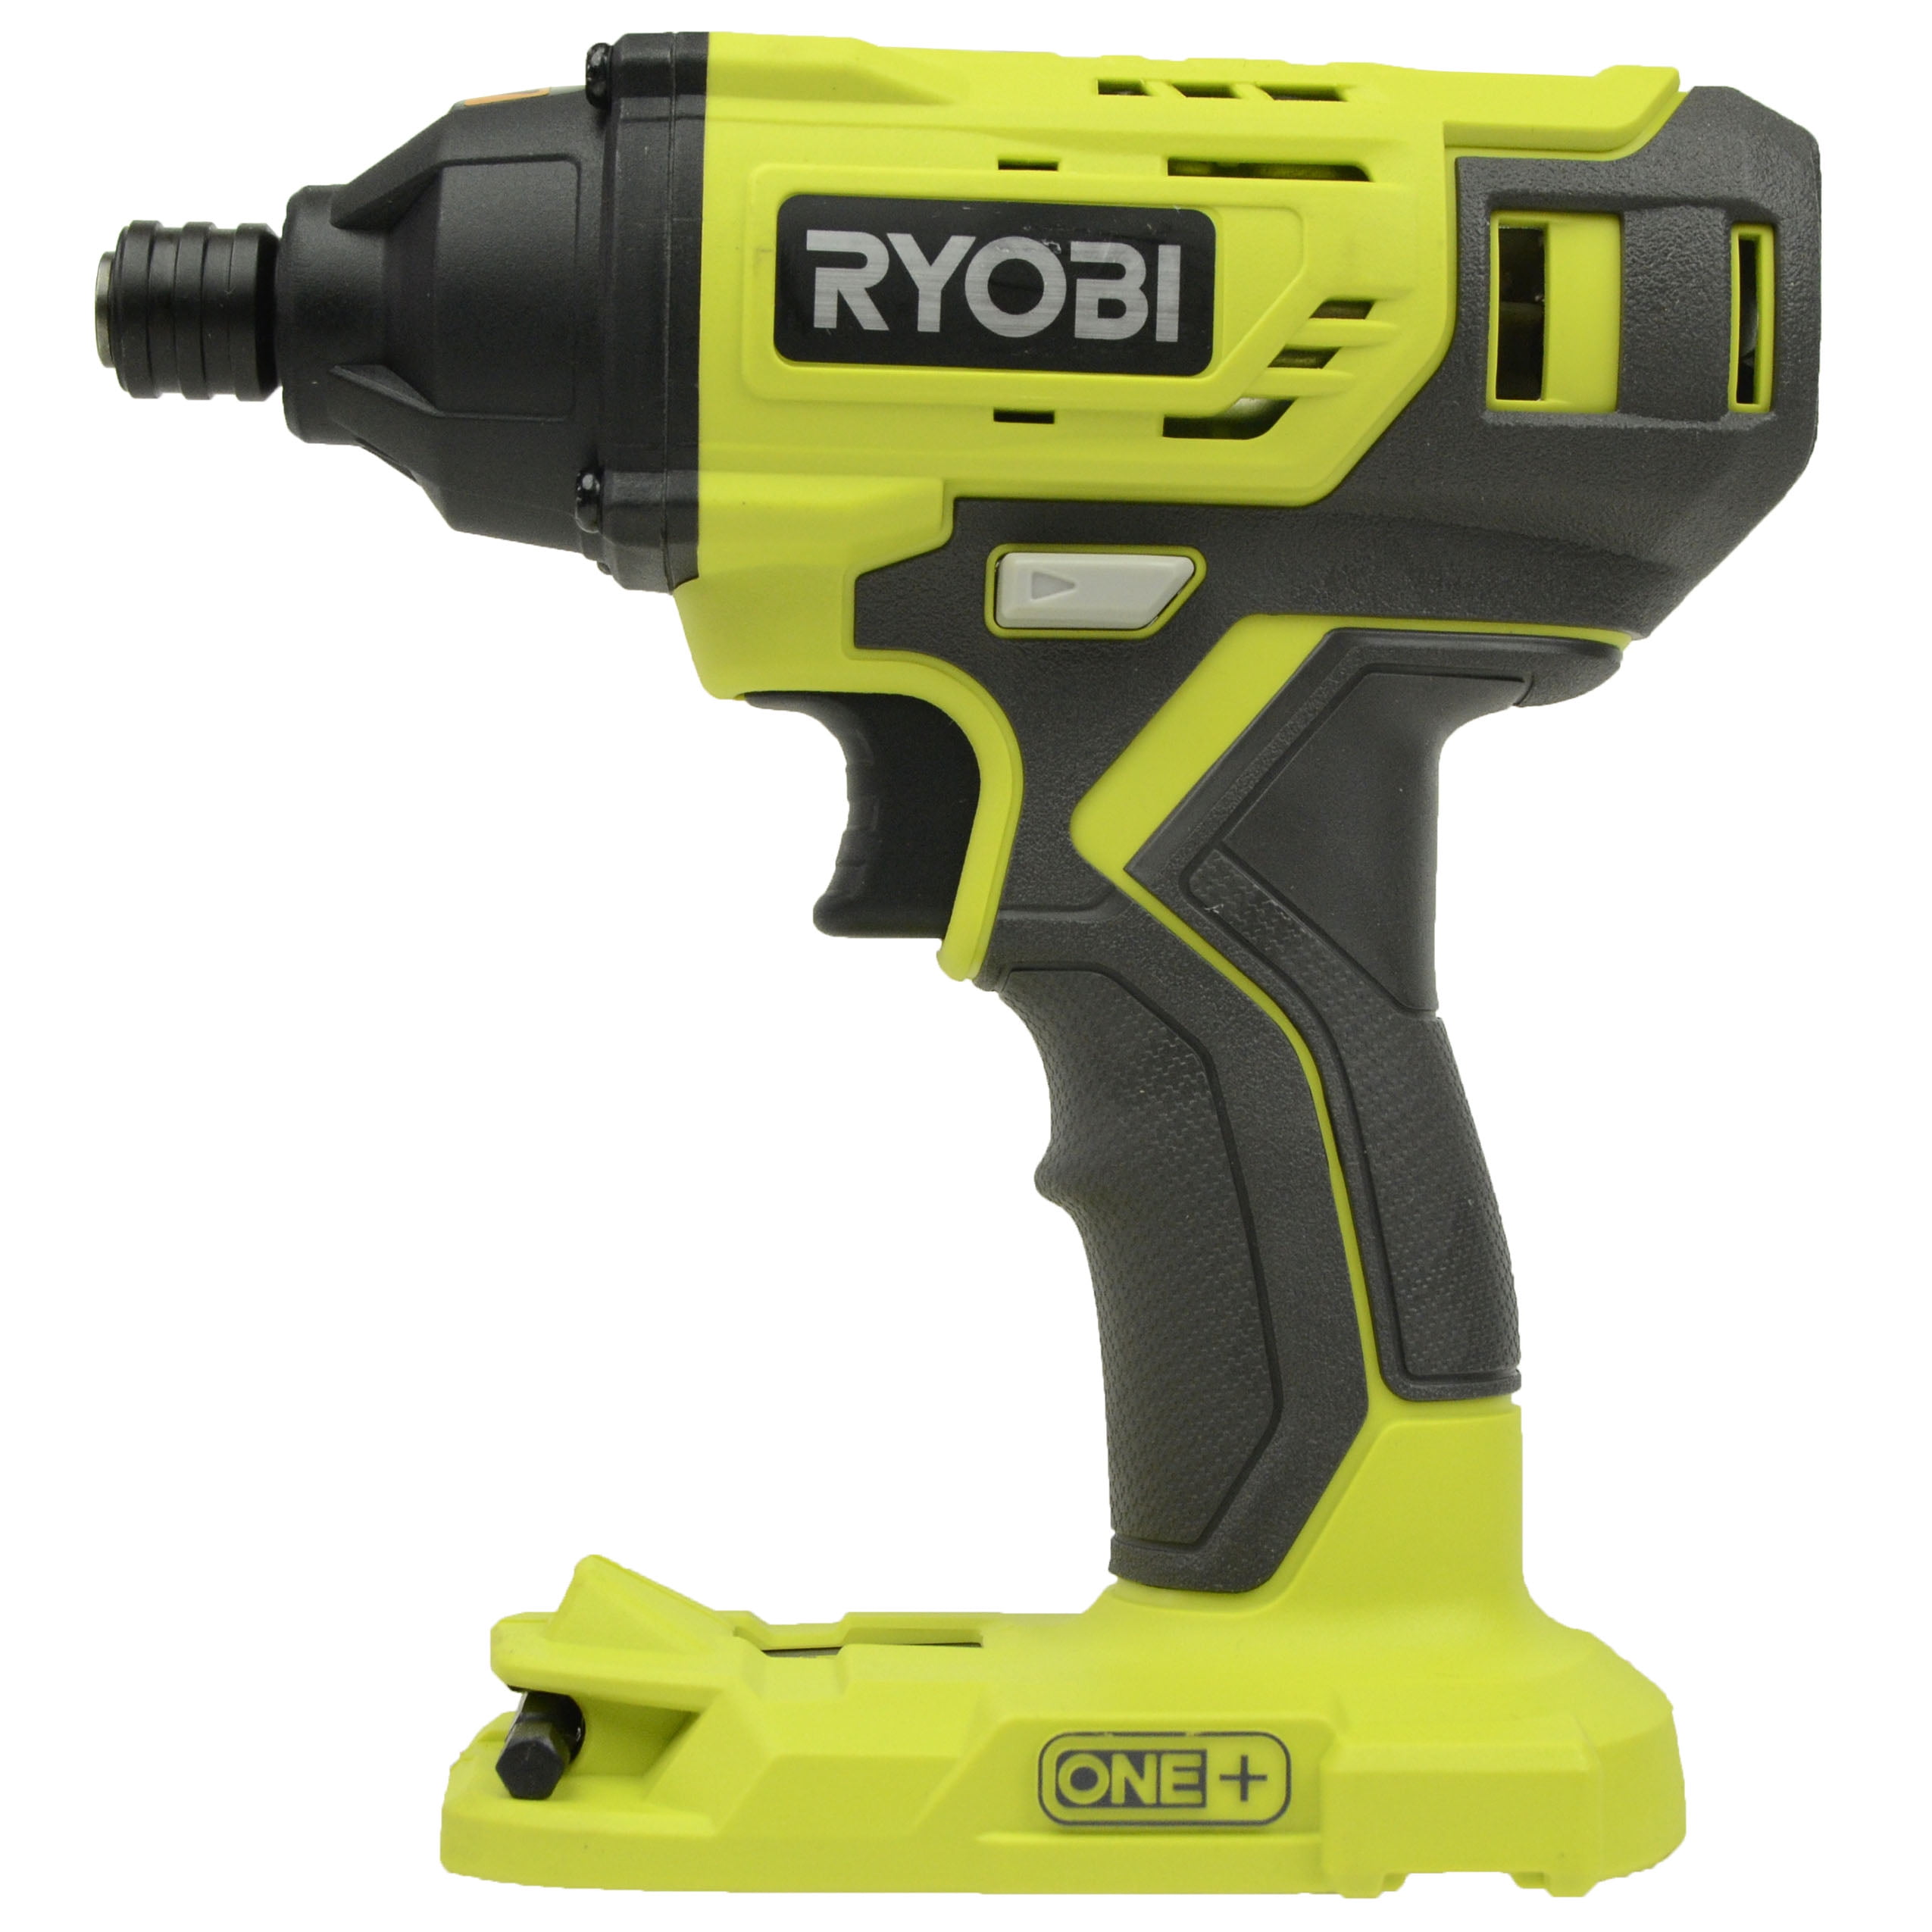 RYOBI P215K 18-Volt ONE Drill/Driver Kit Lithium-Ion Cordless 1/2 in